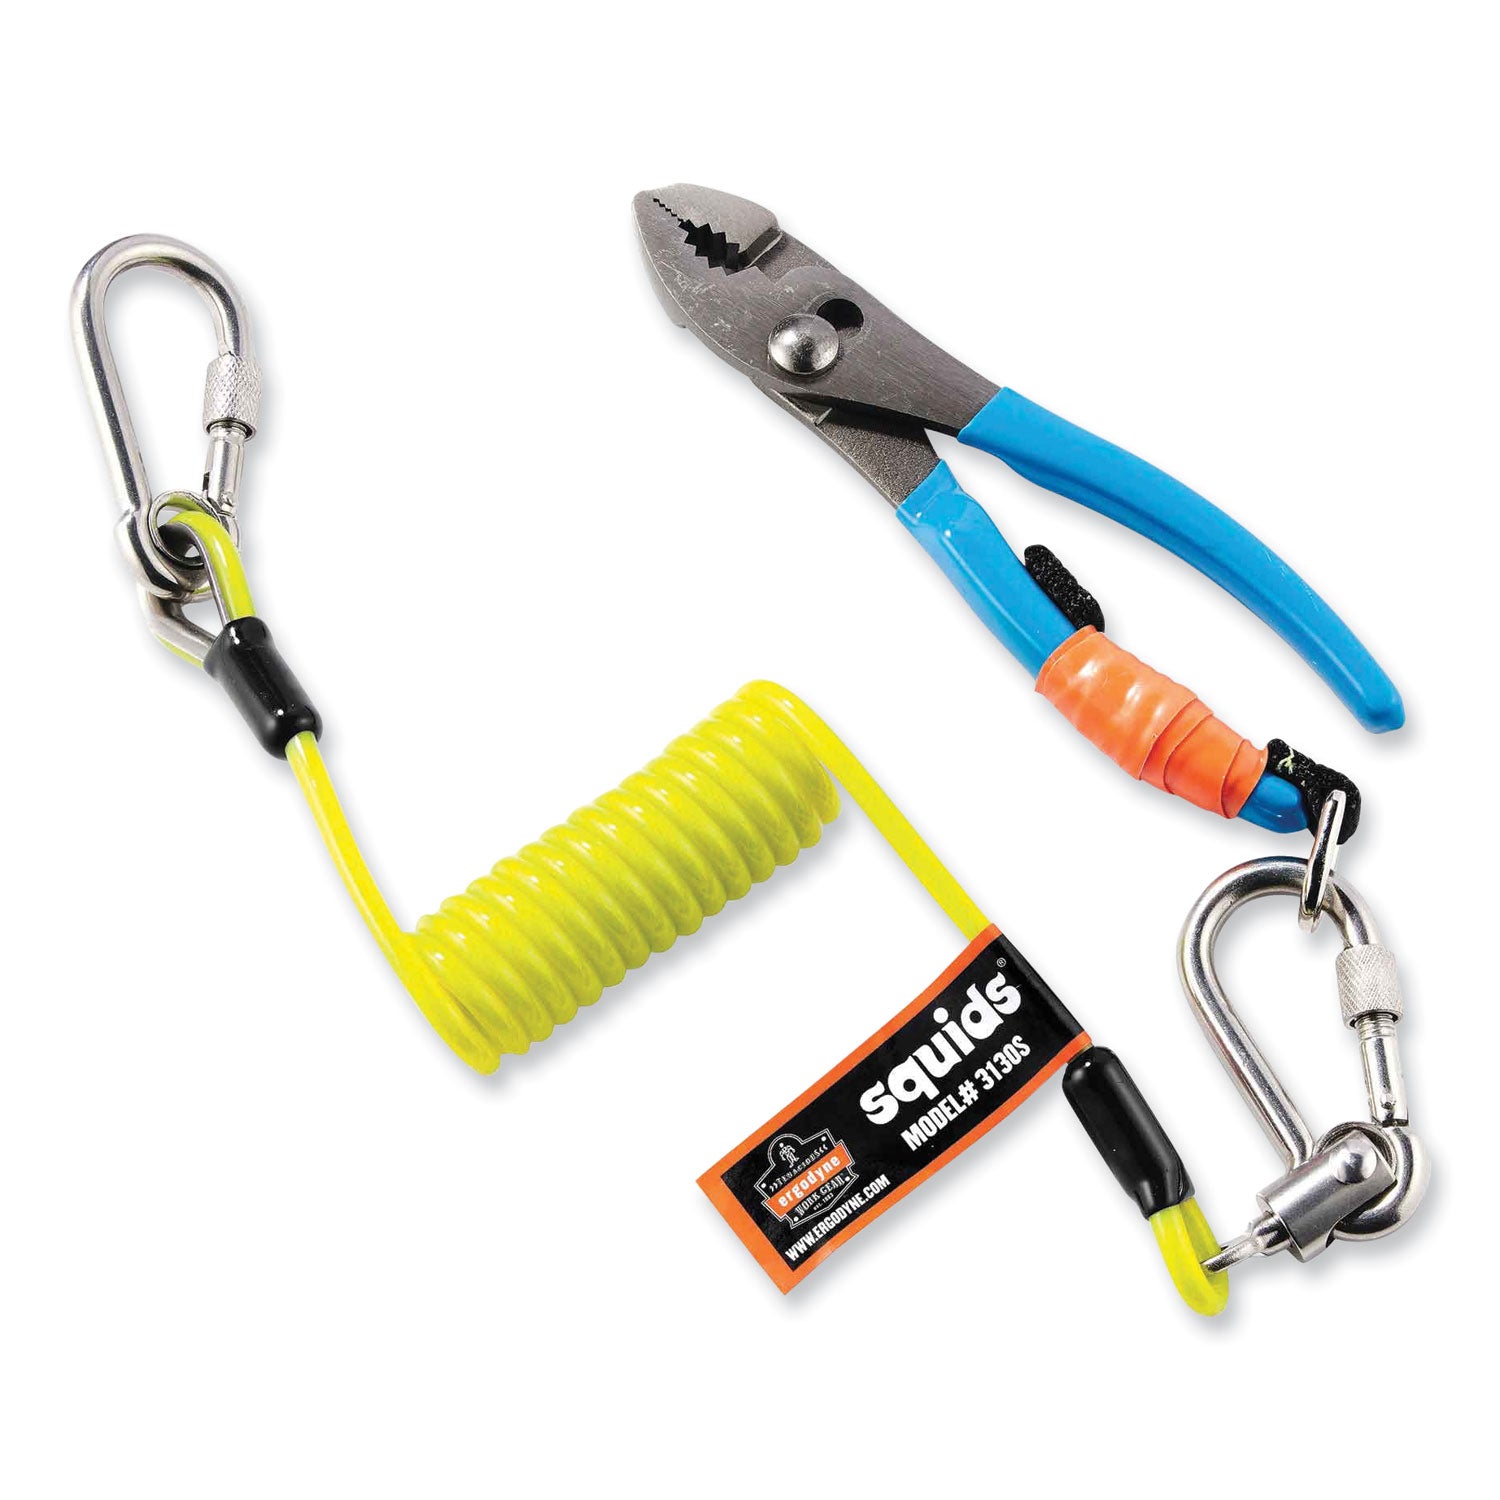 squids-3130s-coiled-cable-lanyard-with-carabiners-2-lb-max-working-capacity-65-to-48-lime-ships-in-1-3-business-days_ego19130 - 2